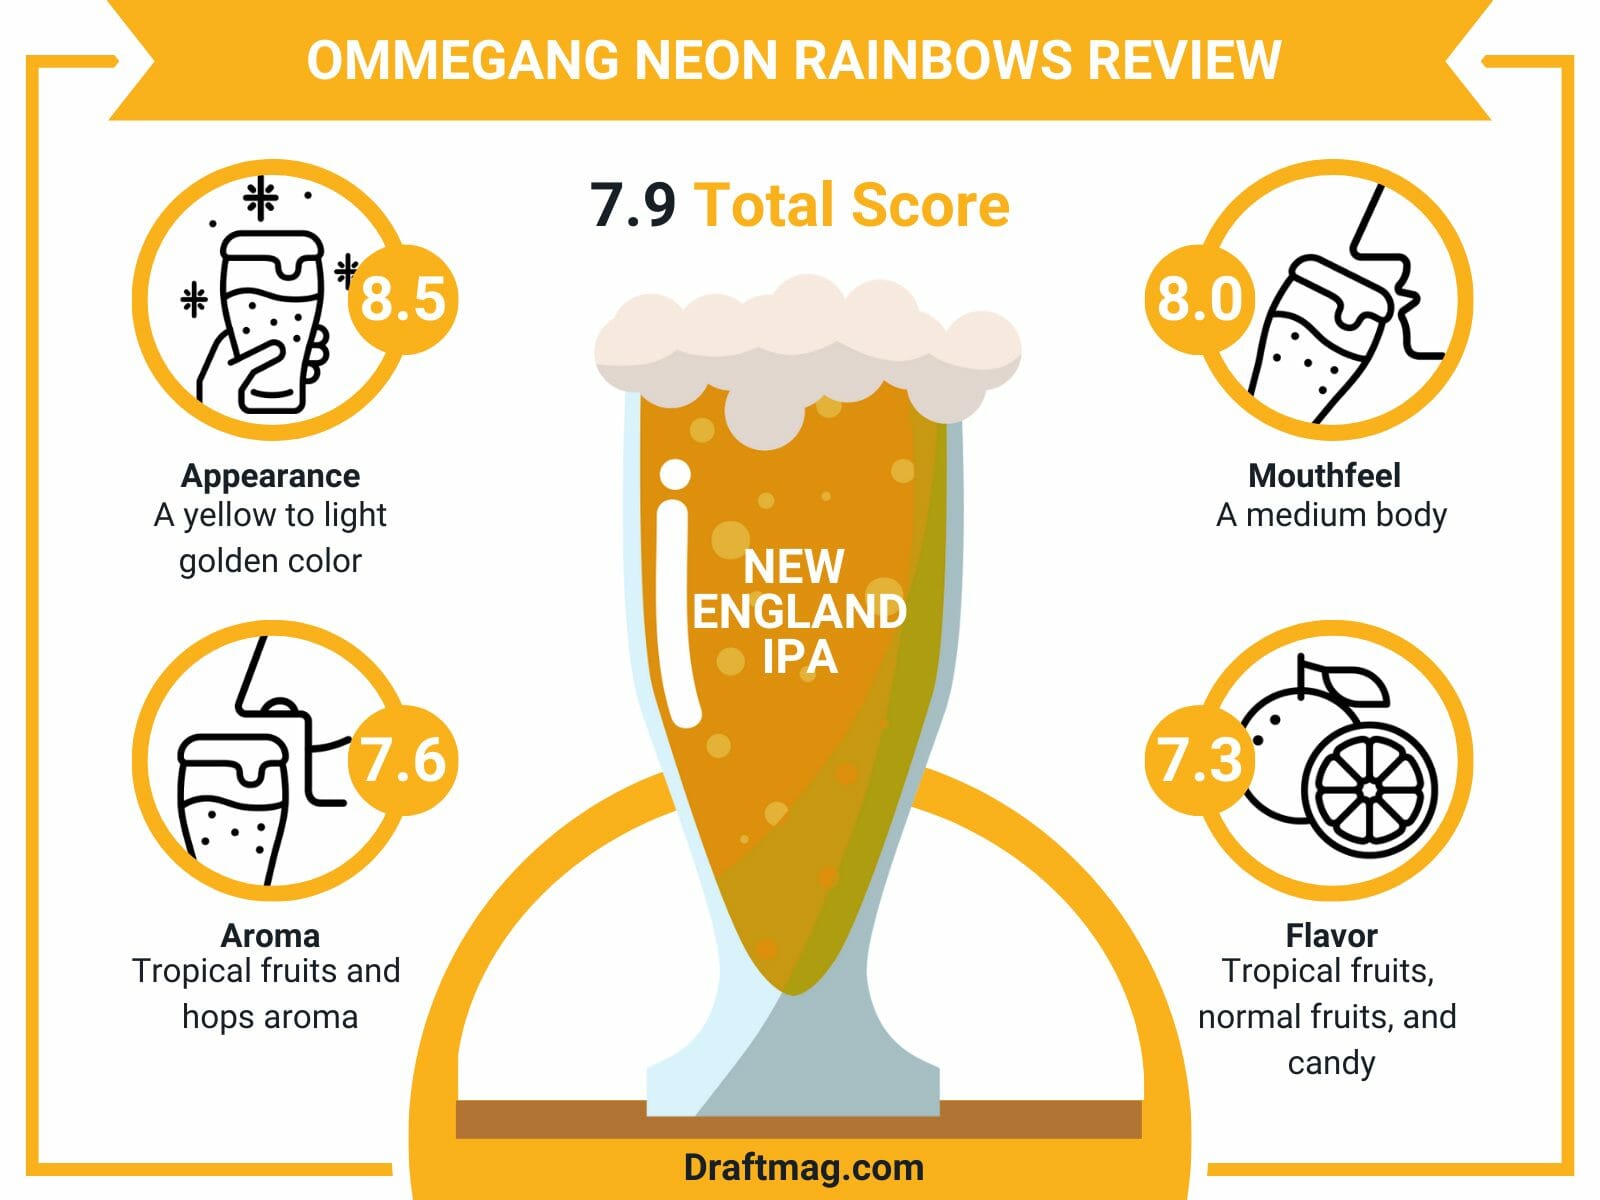 Ommegang neon rainbows review infographics